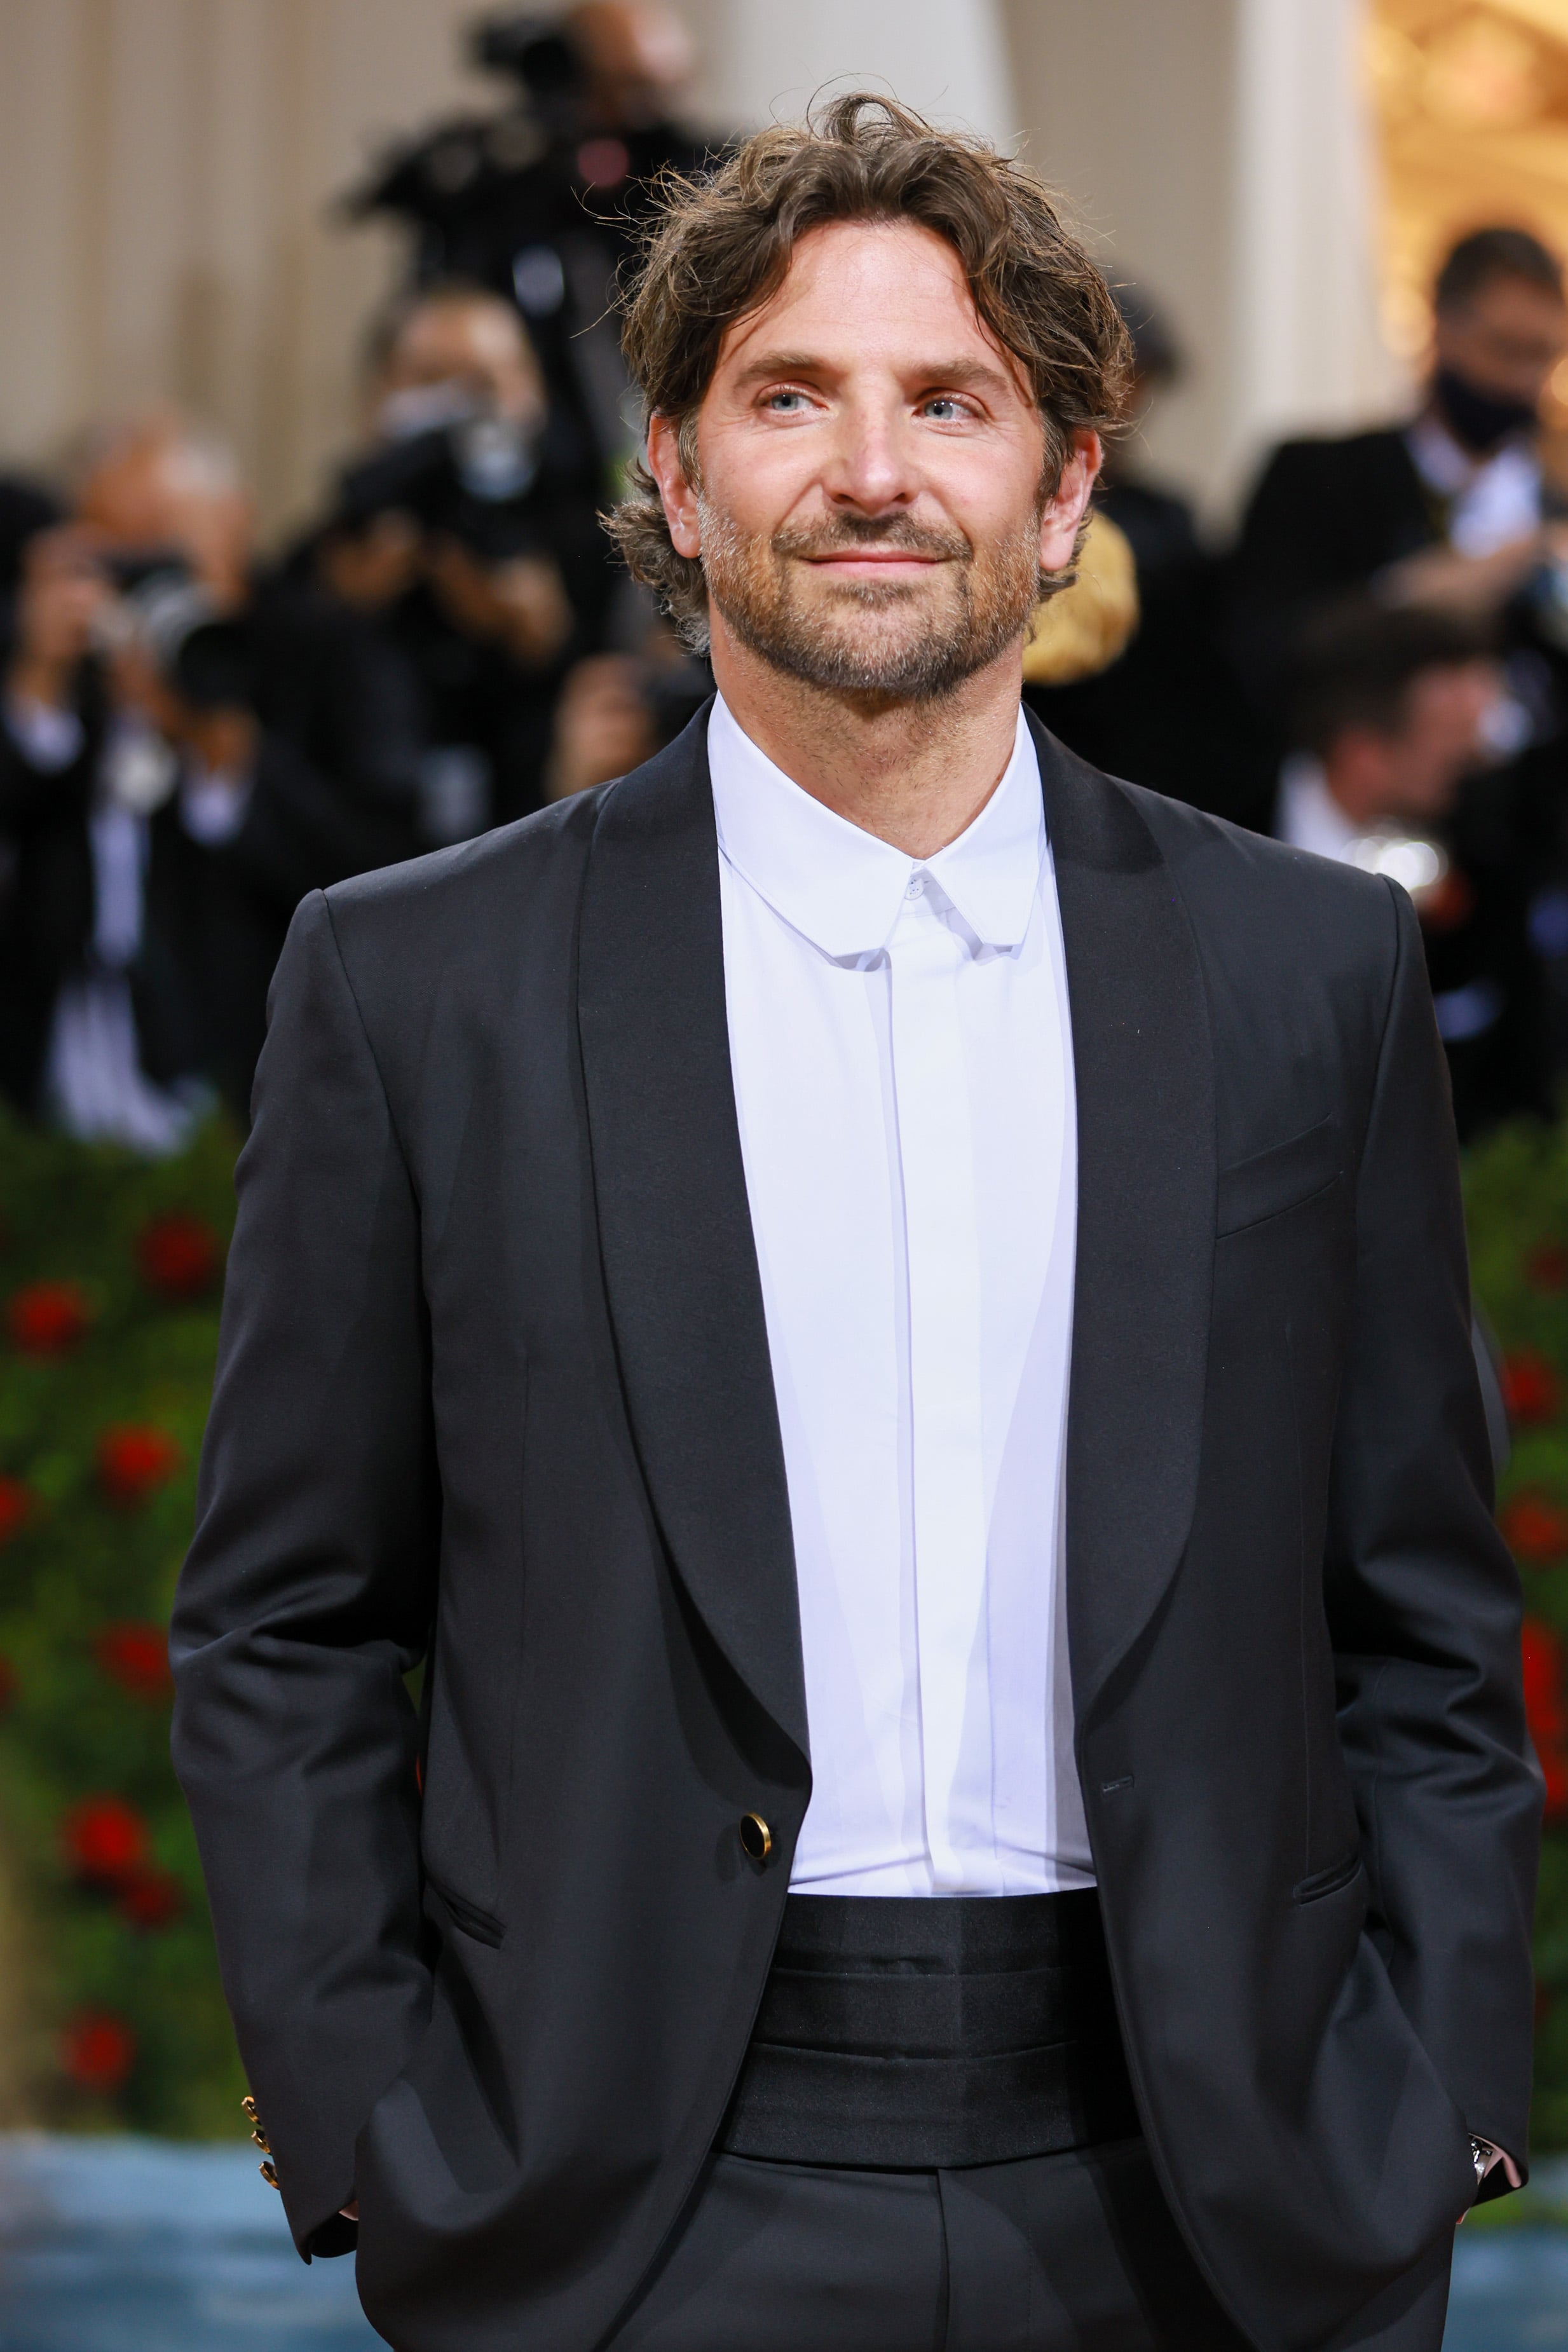 Bradley Cooper Opened Up About His Unique Approach to Fatherhood